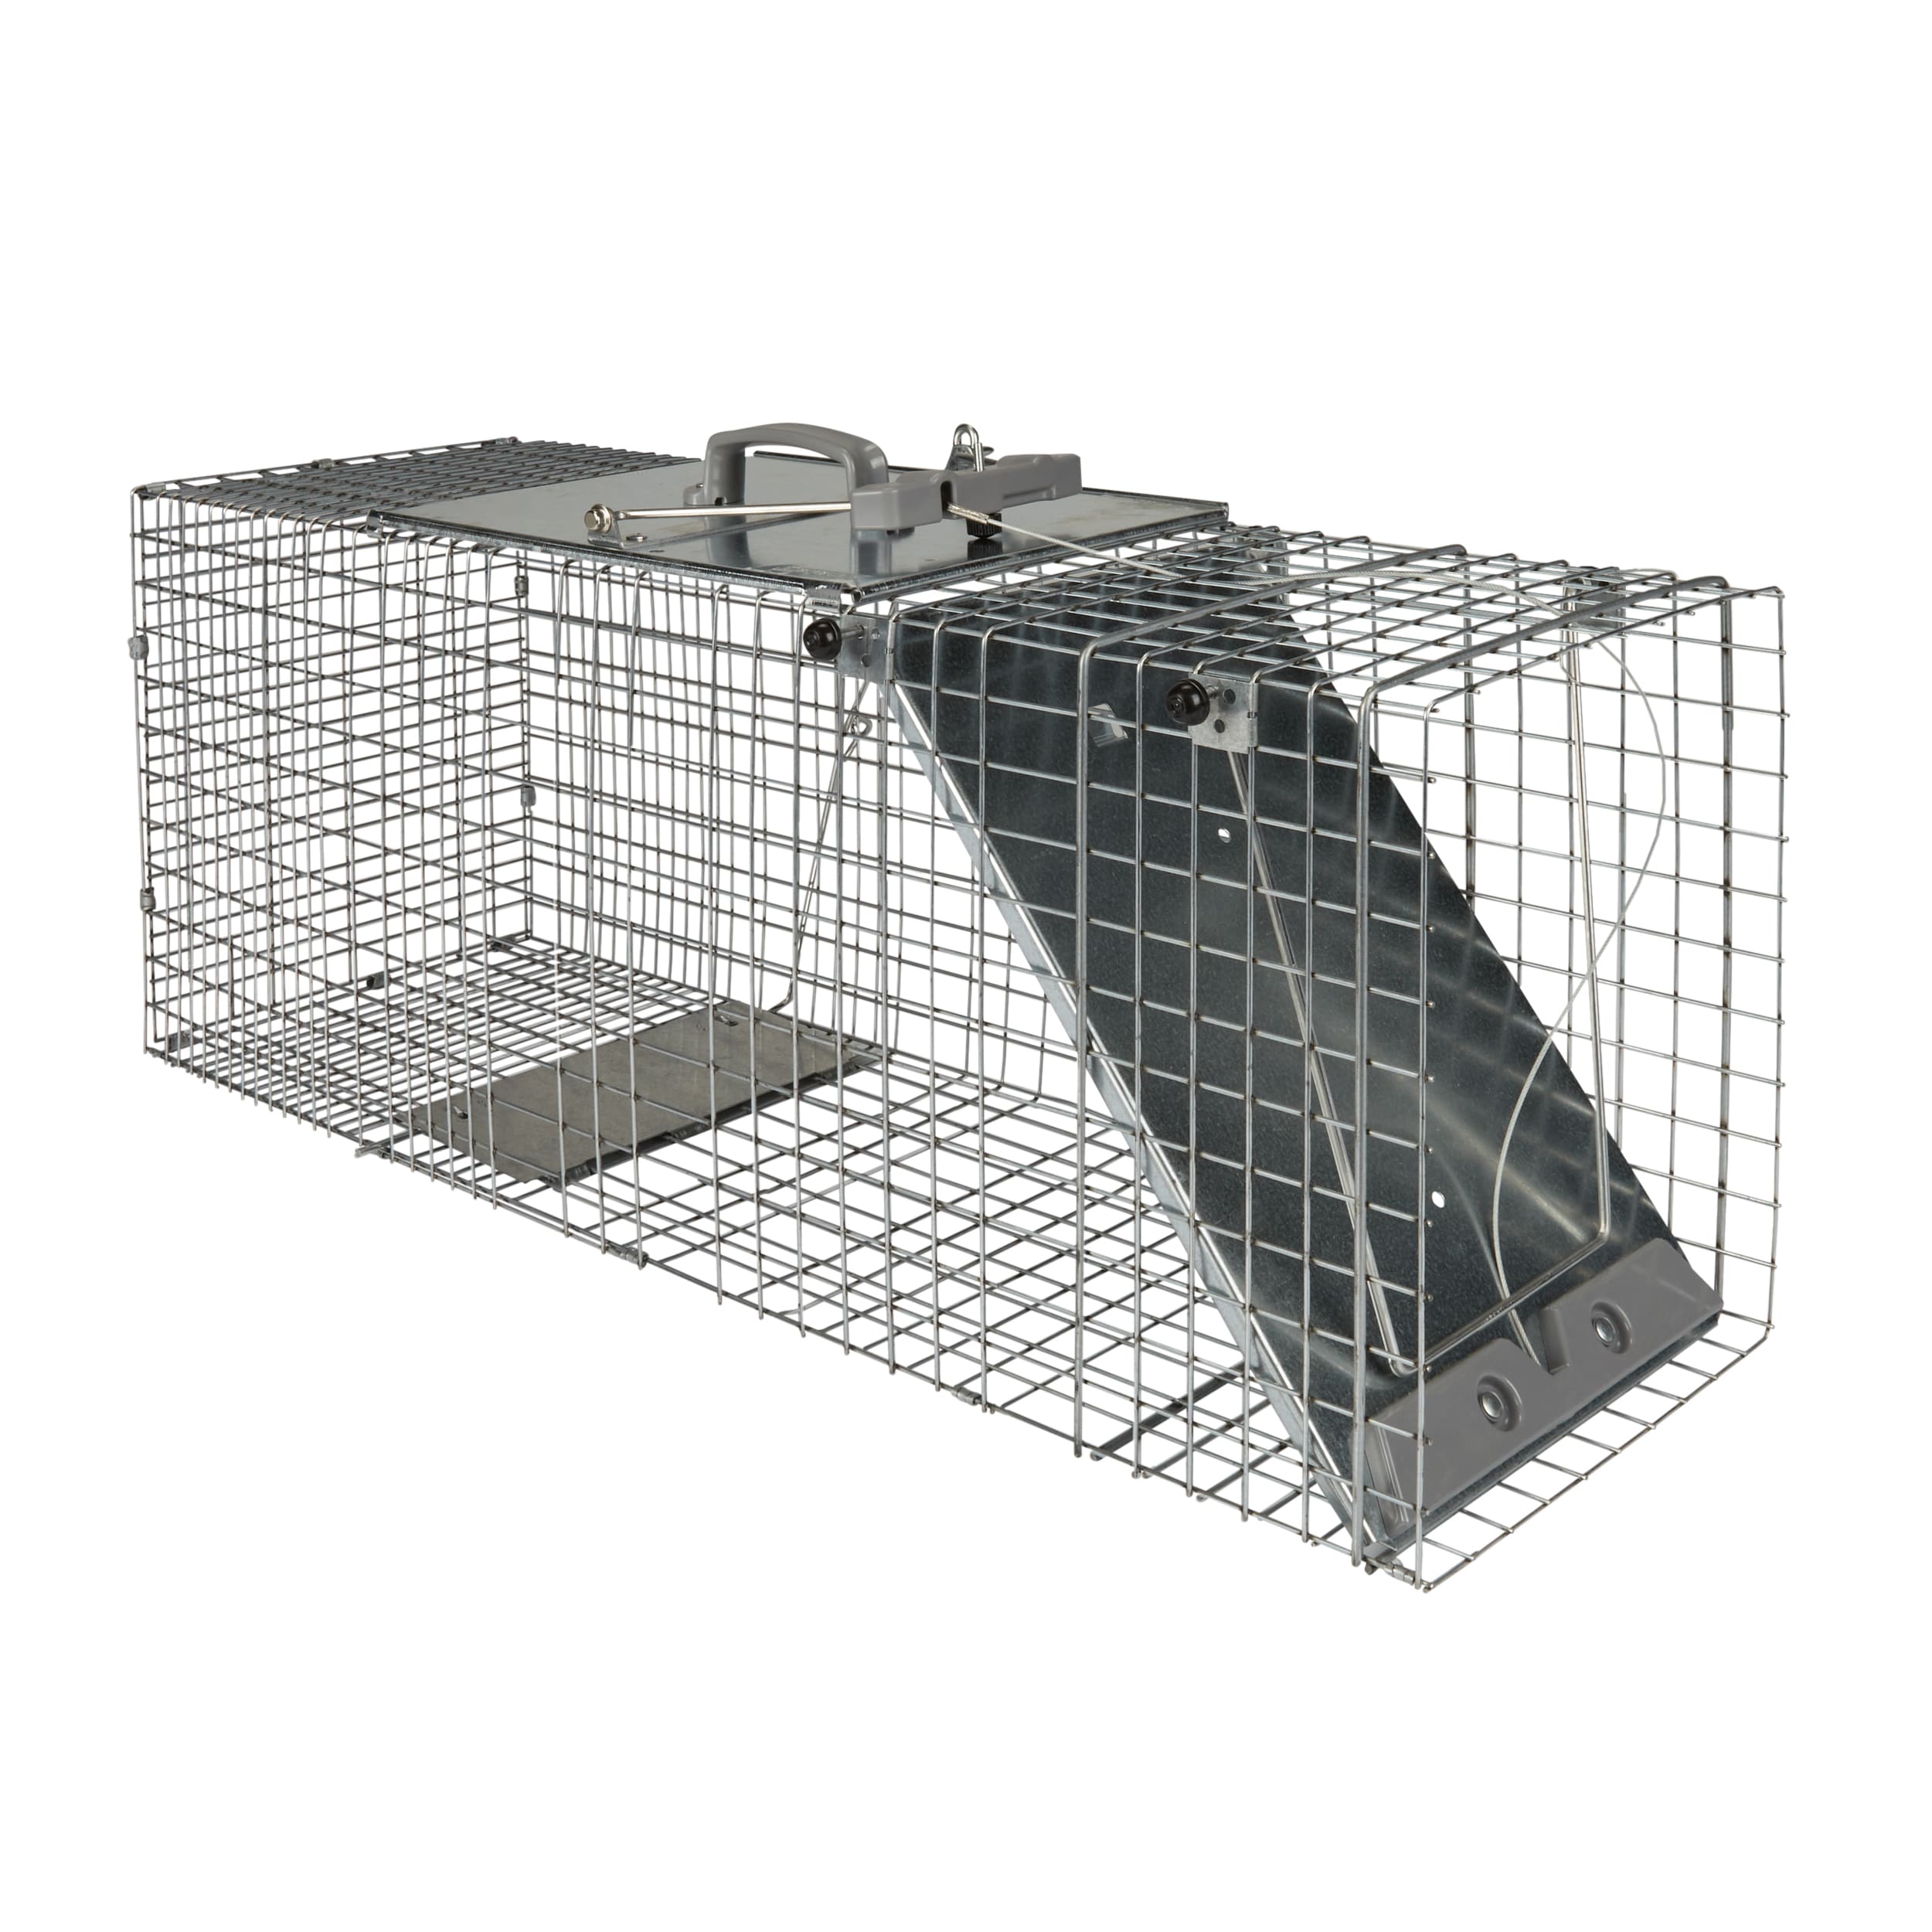 Large Animal Trap Cat Trap for Stray Cats Humane,Small  Dogs,Fox,Rabbit,Groundhog,Squirrel,Raccoon,Chicken,Opossum, 32inch Live  Traps for Animals